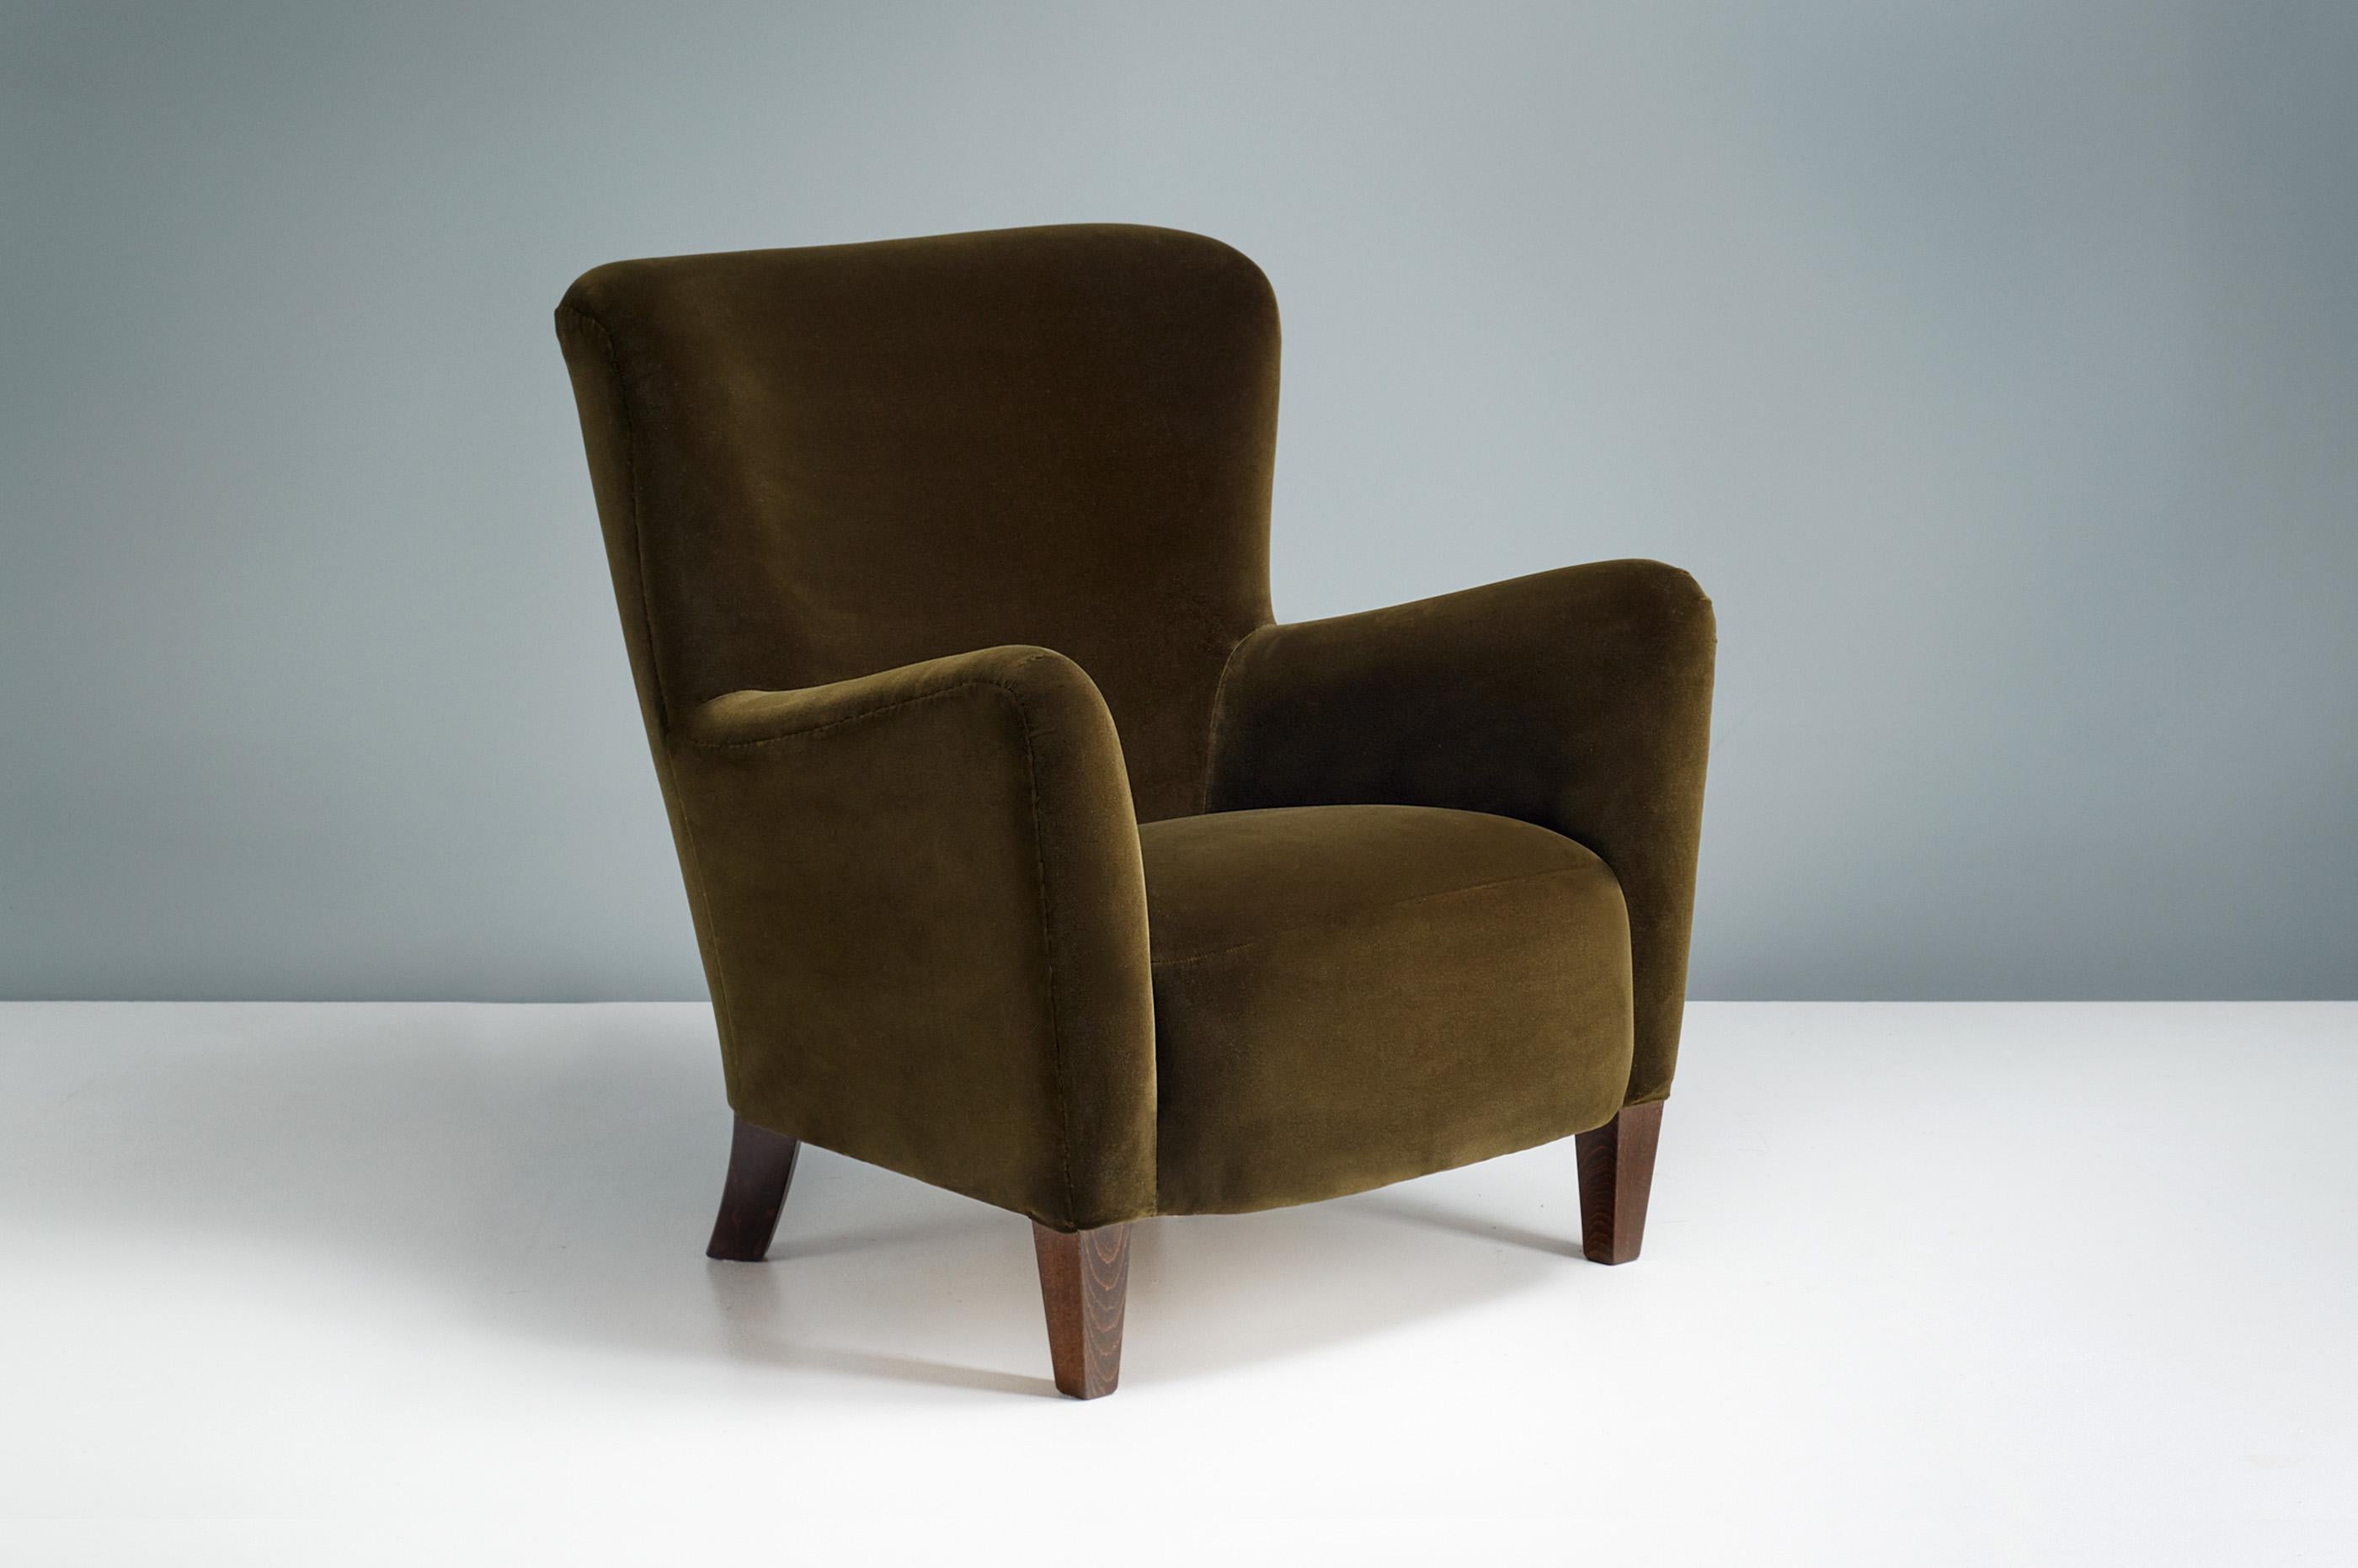 Dagmar Ryo Lounge Chair

A custom made lounge chair developed and produced at our workshops in London using the highest quality materials. These examples are upholstered in luxurious cotton velvet by Rose Uniacke. The Ryo chair is available to order